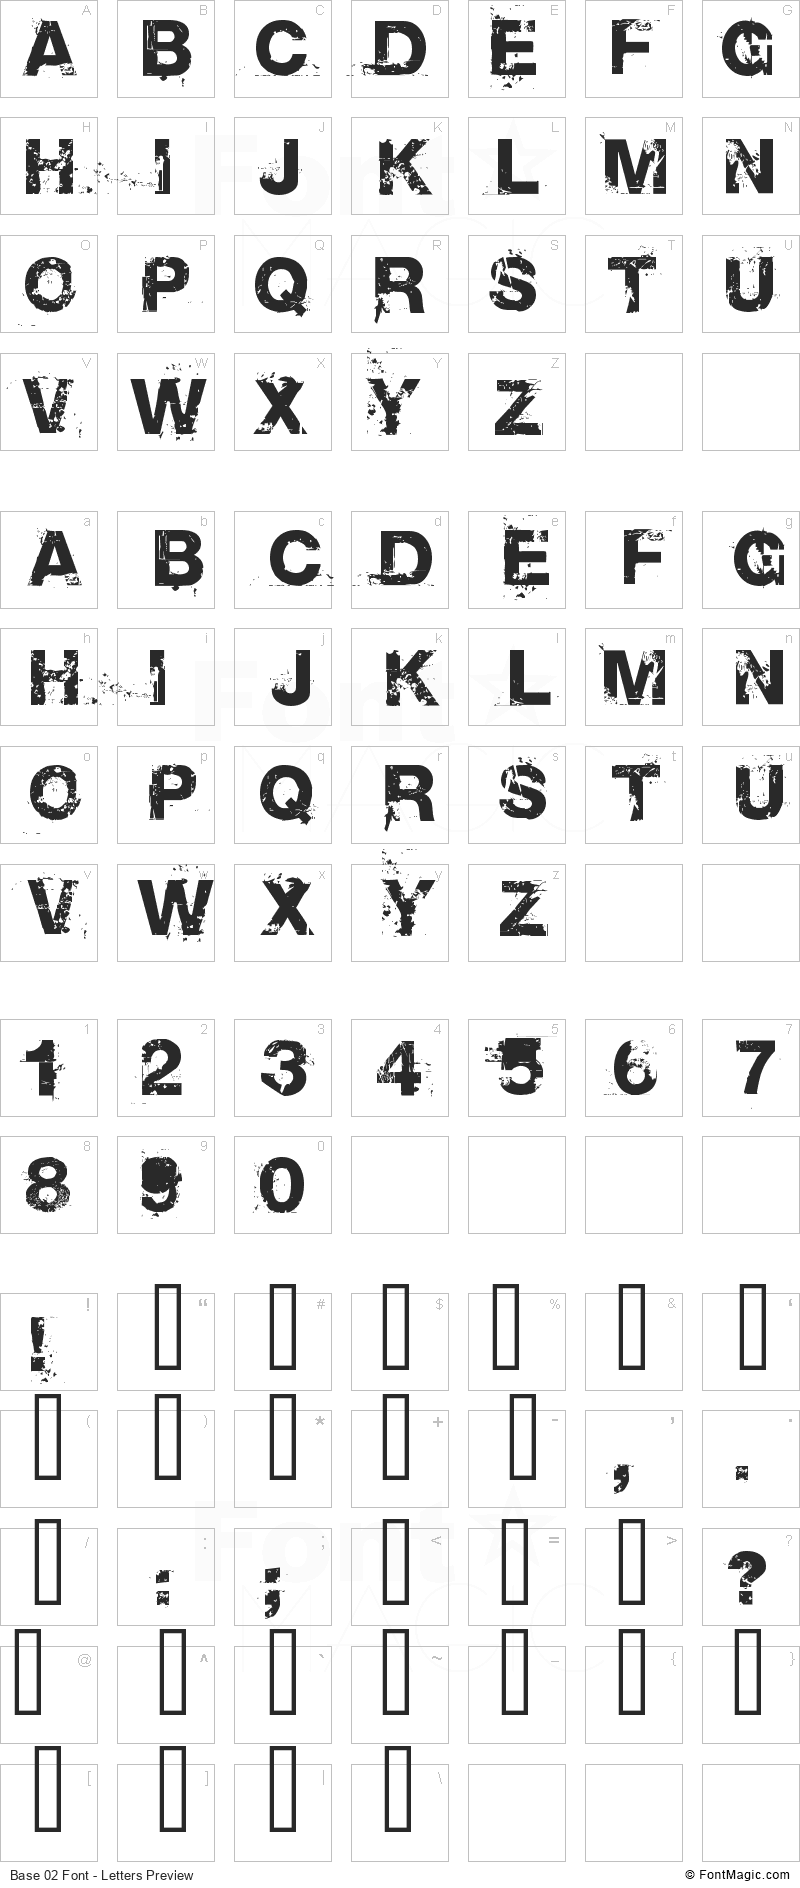 Base 02 Font - All Latters Preview Chart